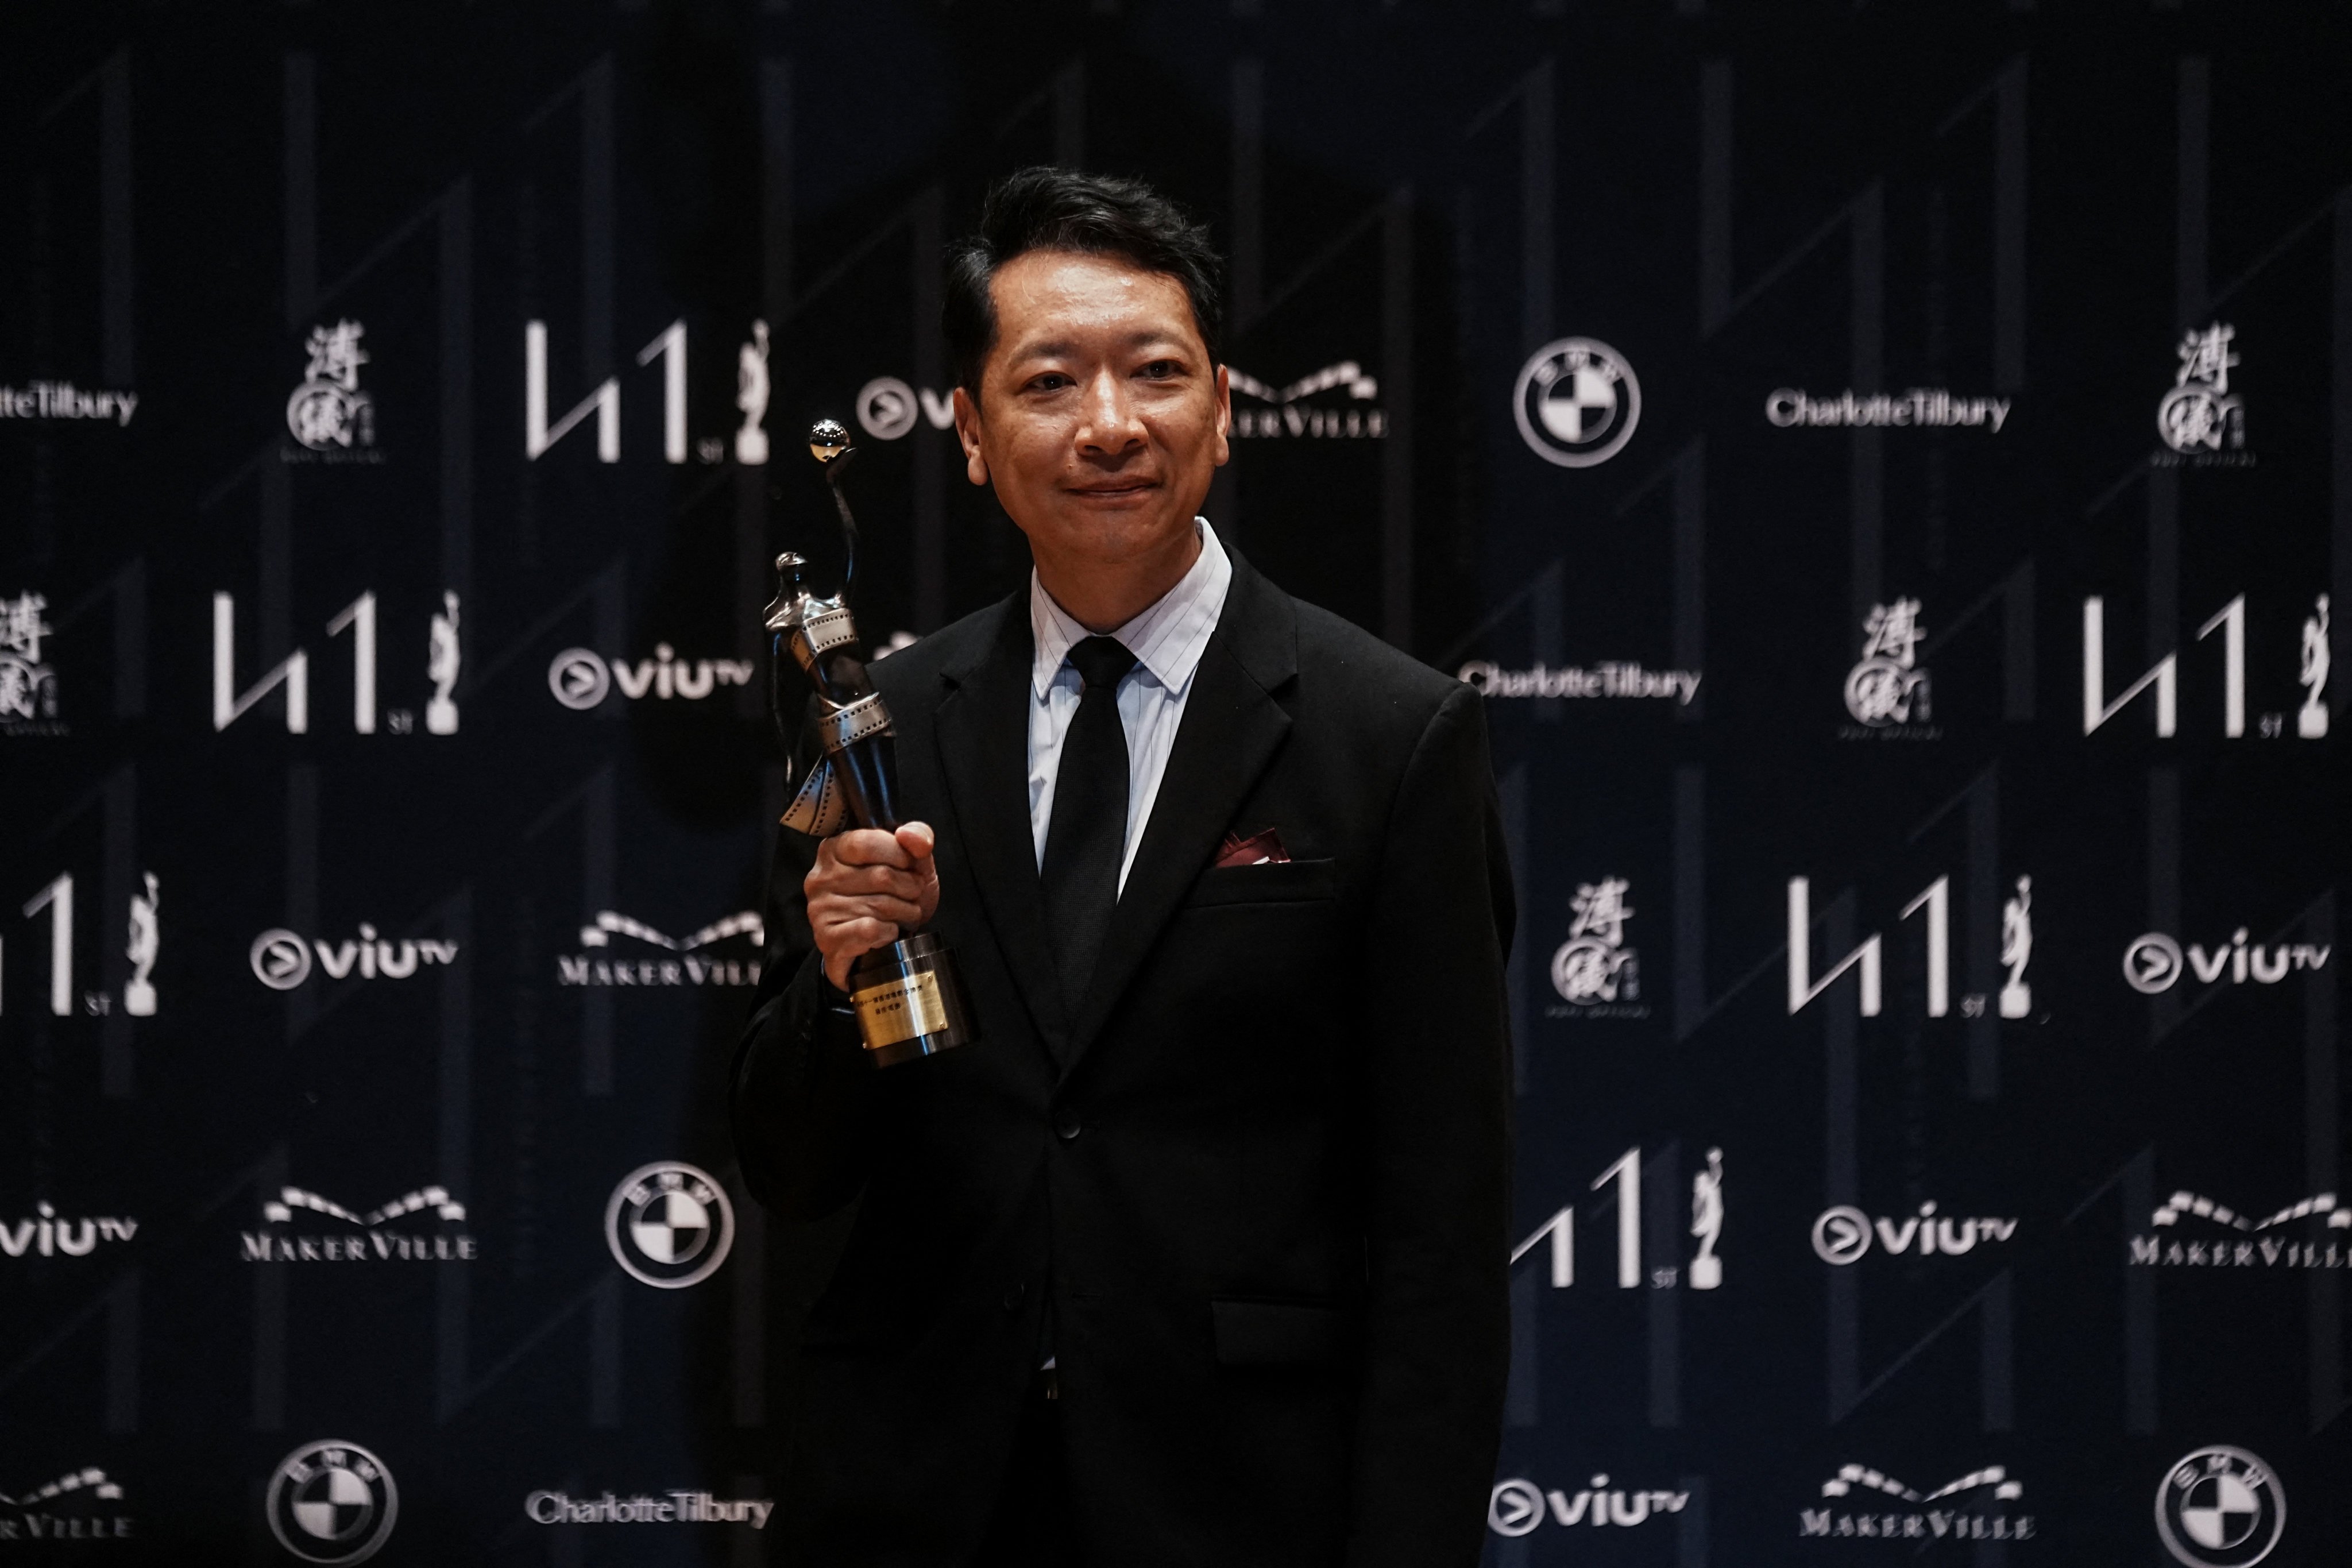 Co-director William Kwok poses with his trophy at the 41st Hong Kong Film Awards in Hong Kong. Photo: Reuters